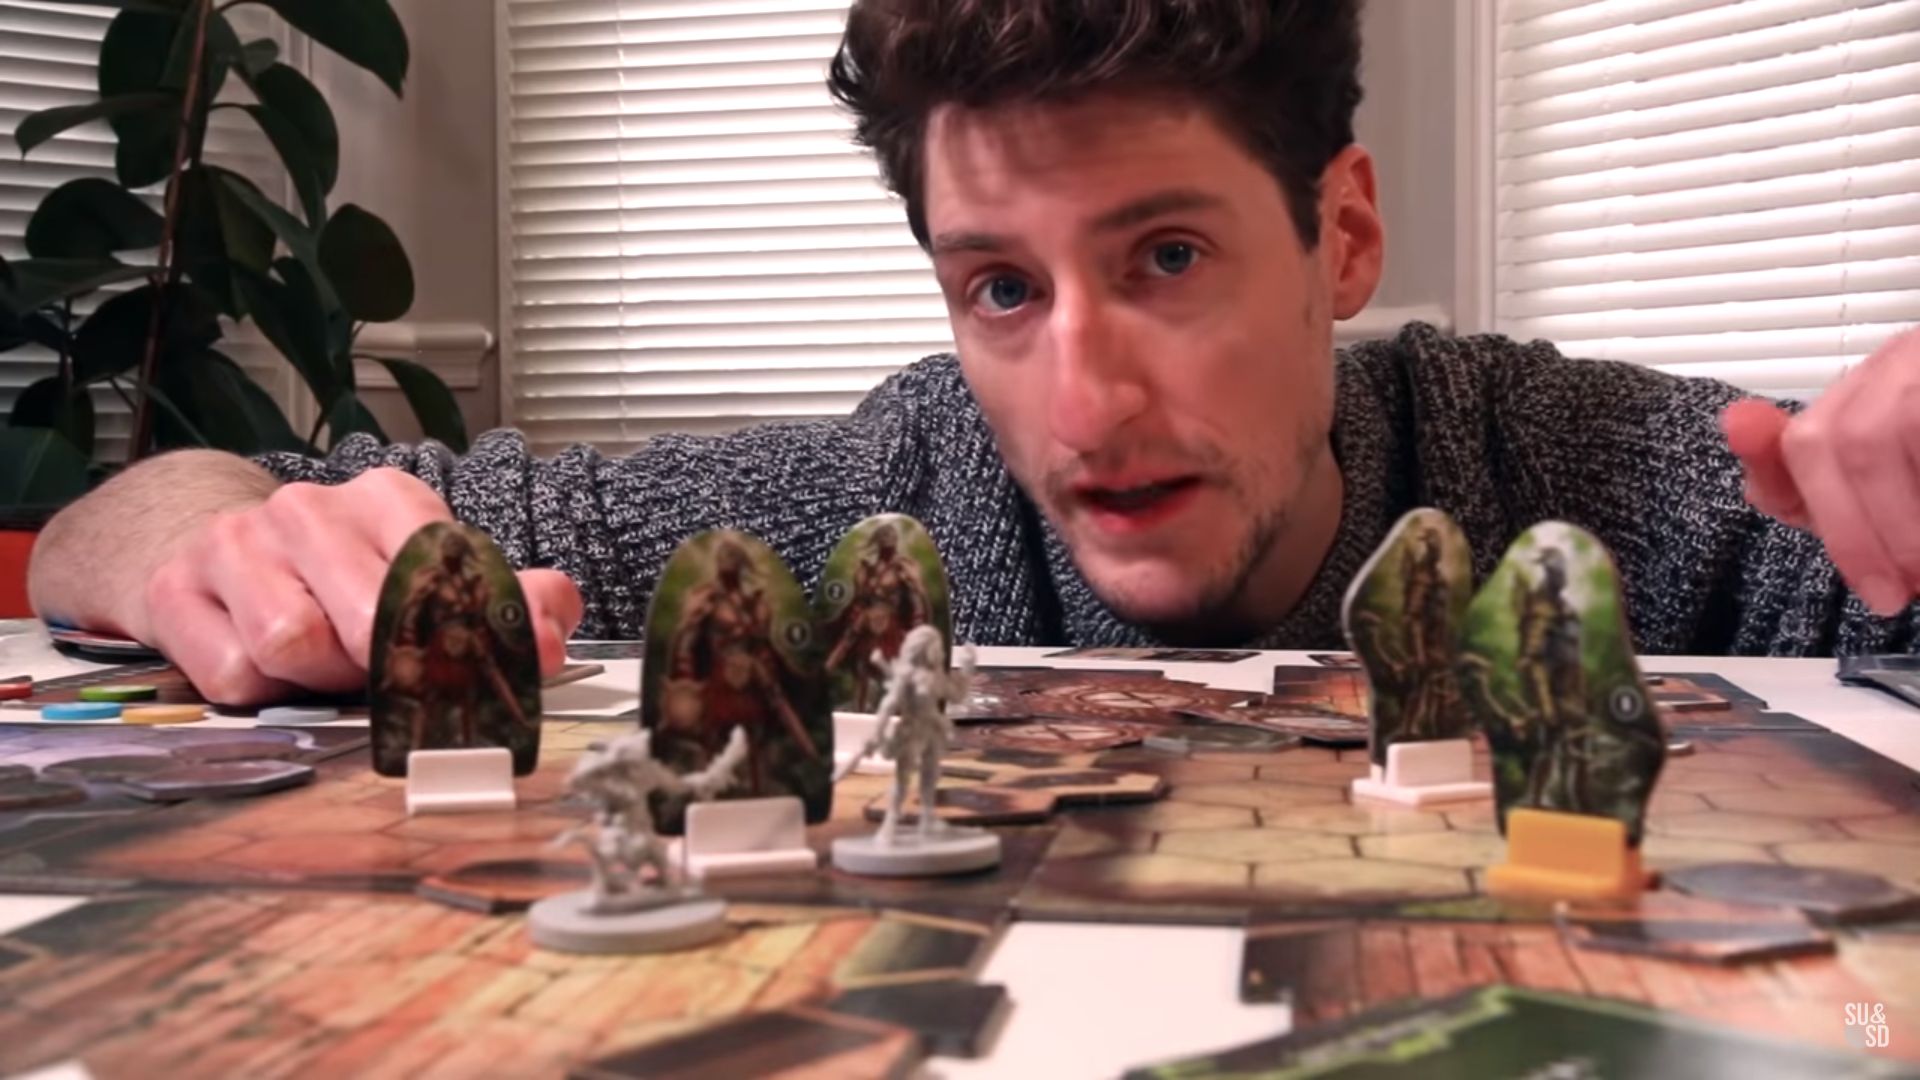 Give us your Gloomhaven questions for Isaac Childres!